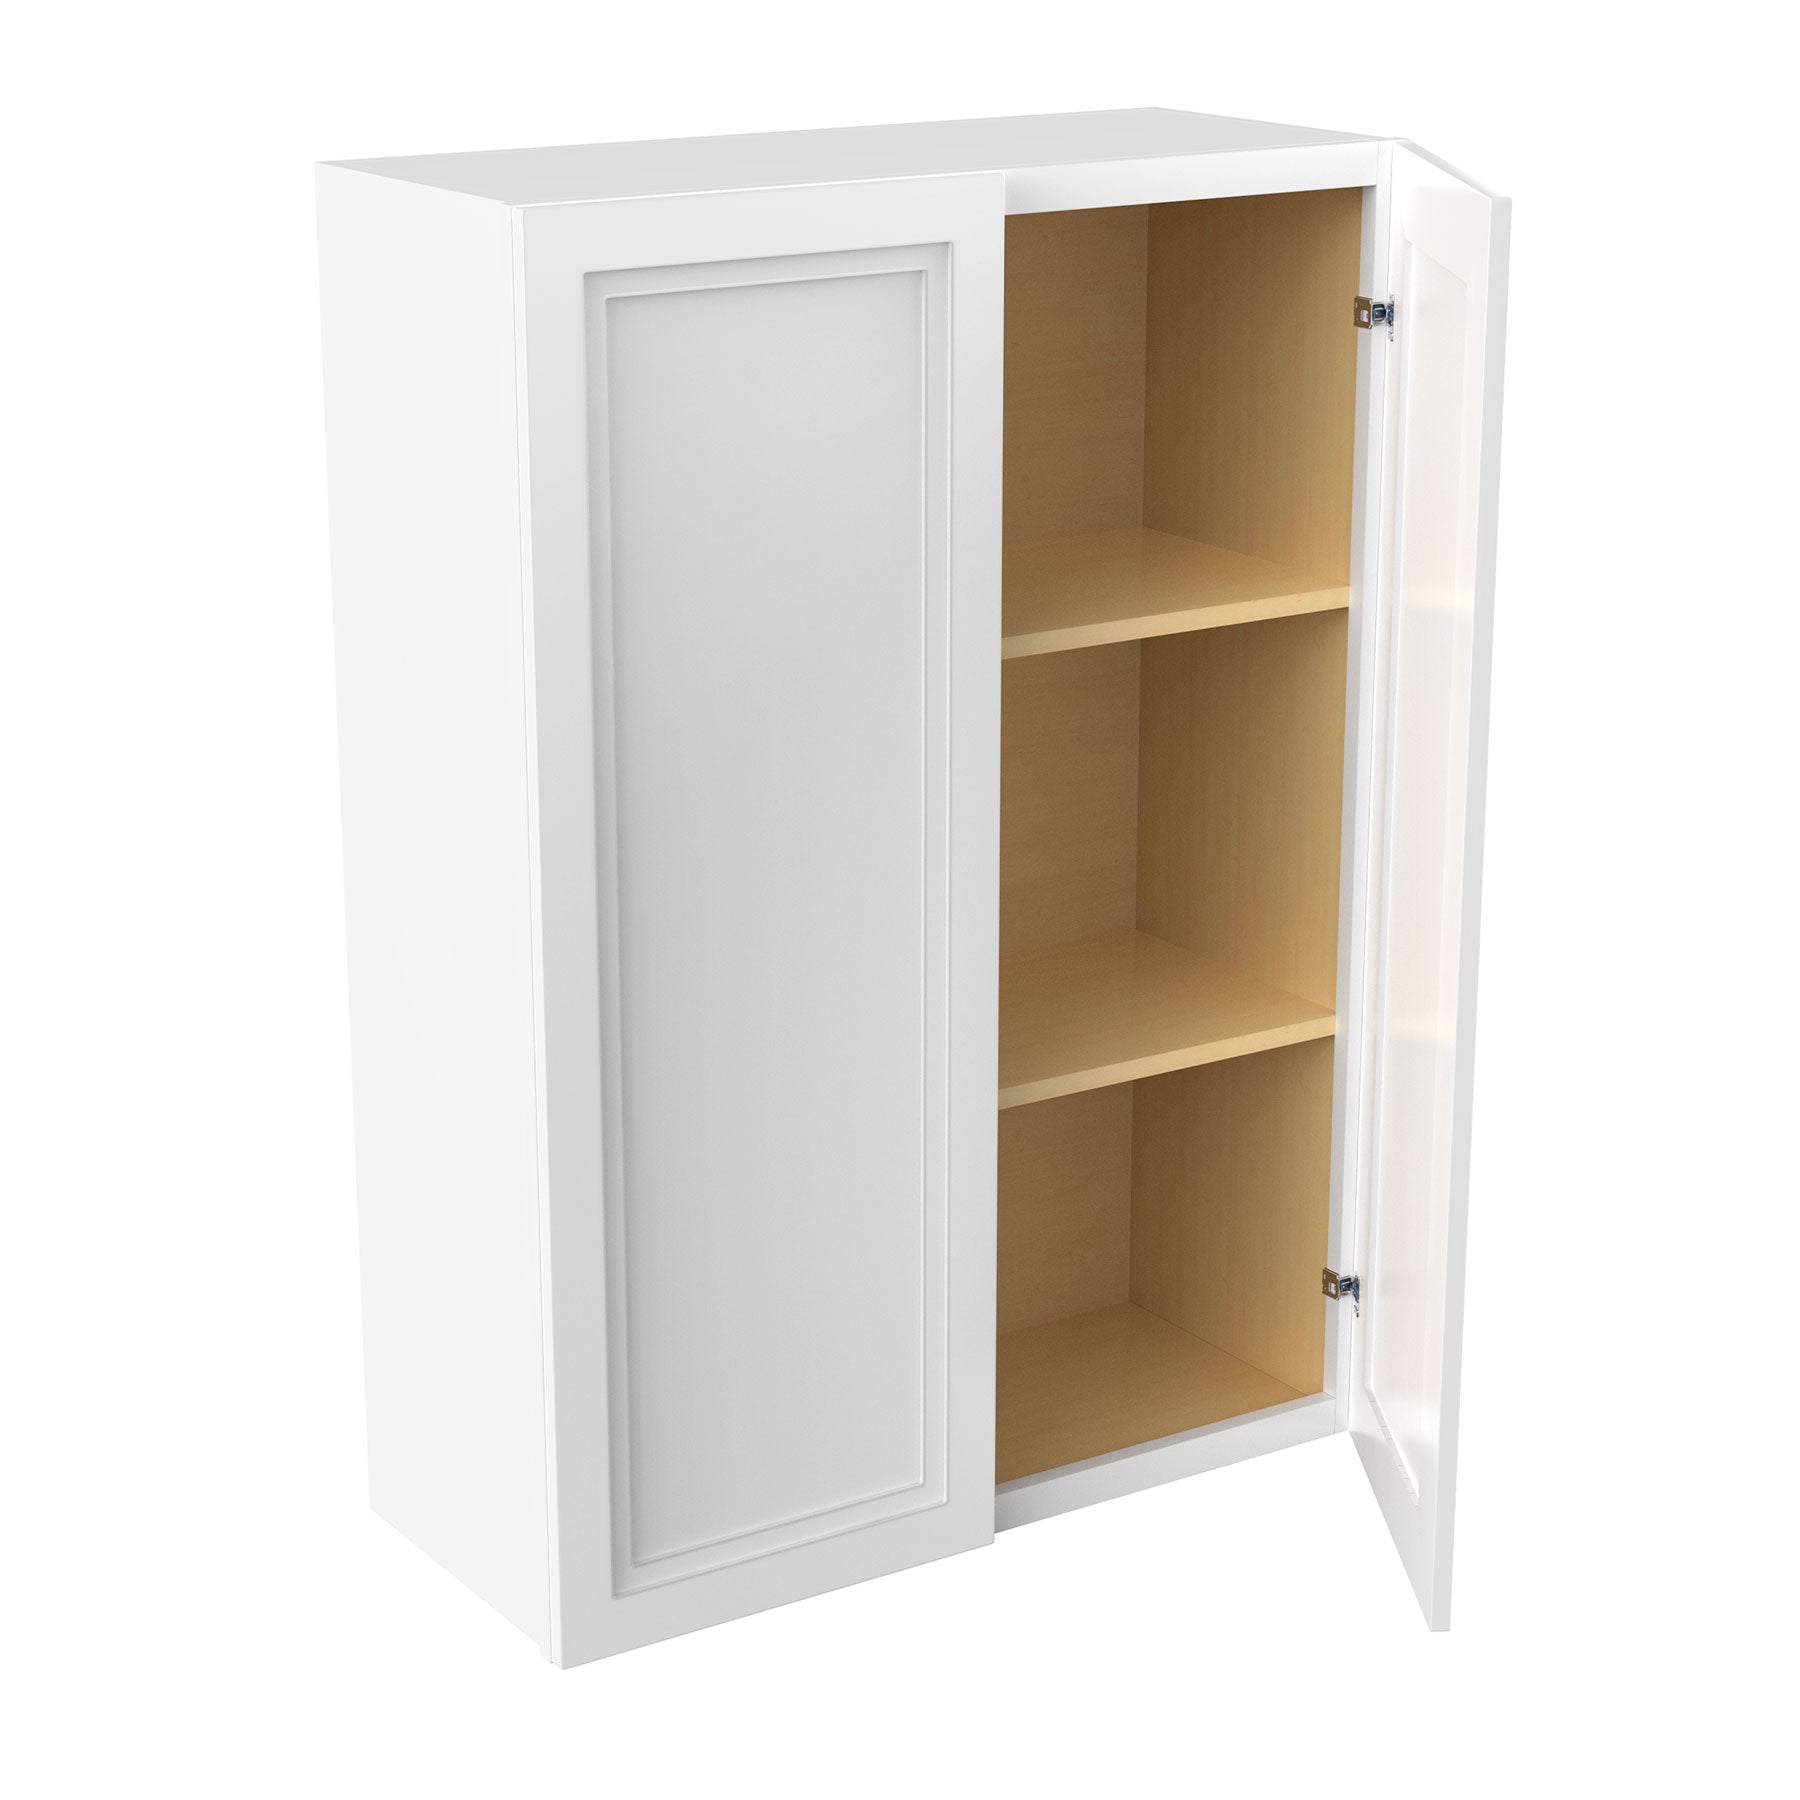 Fashion White - Double Door Wall Cabinet | 30"W x 42"H x 12"D